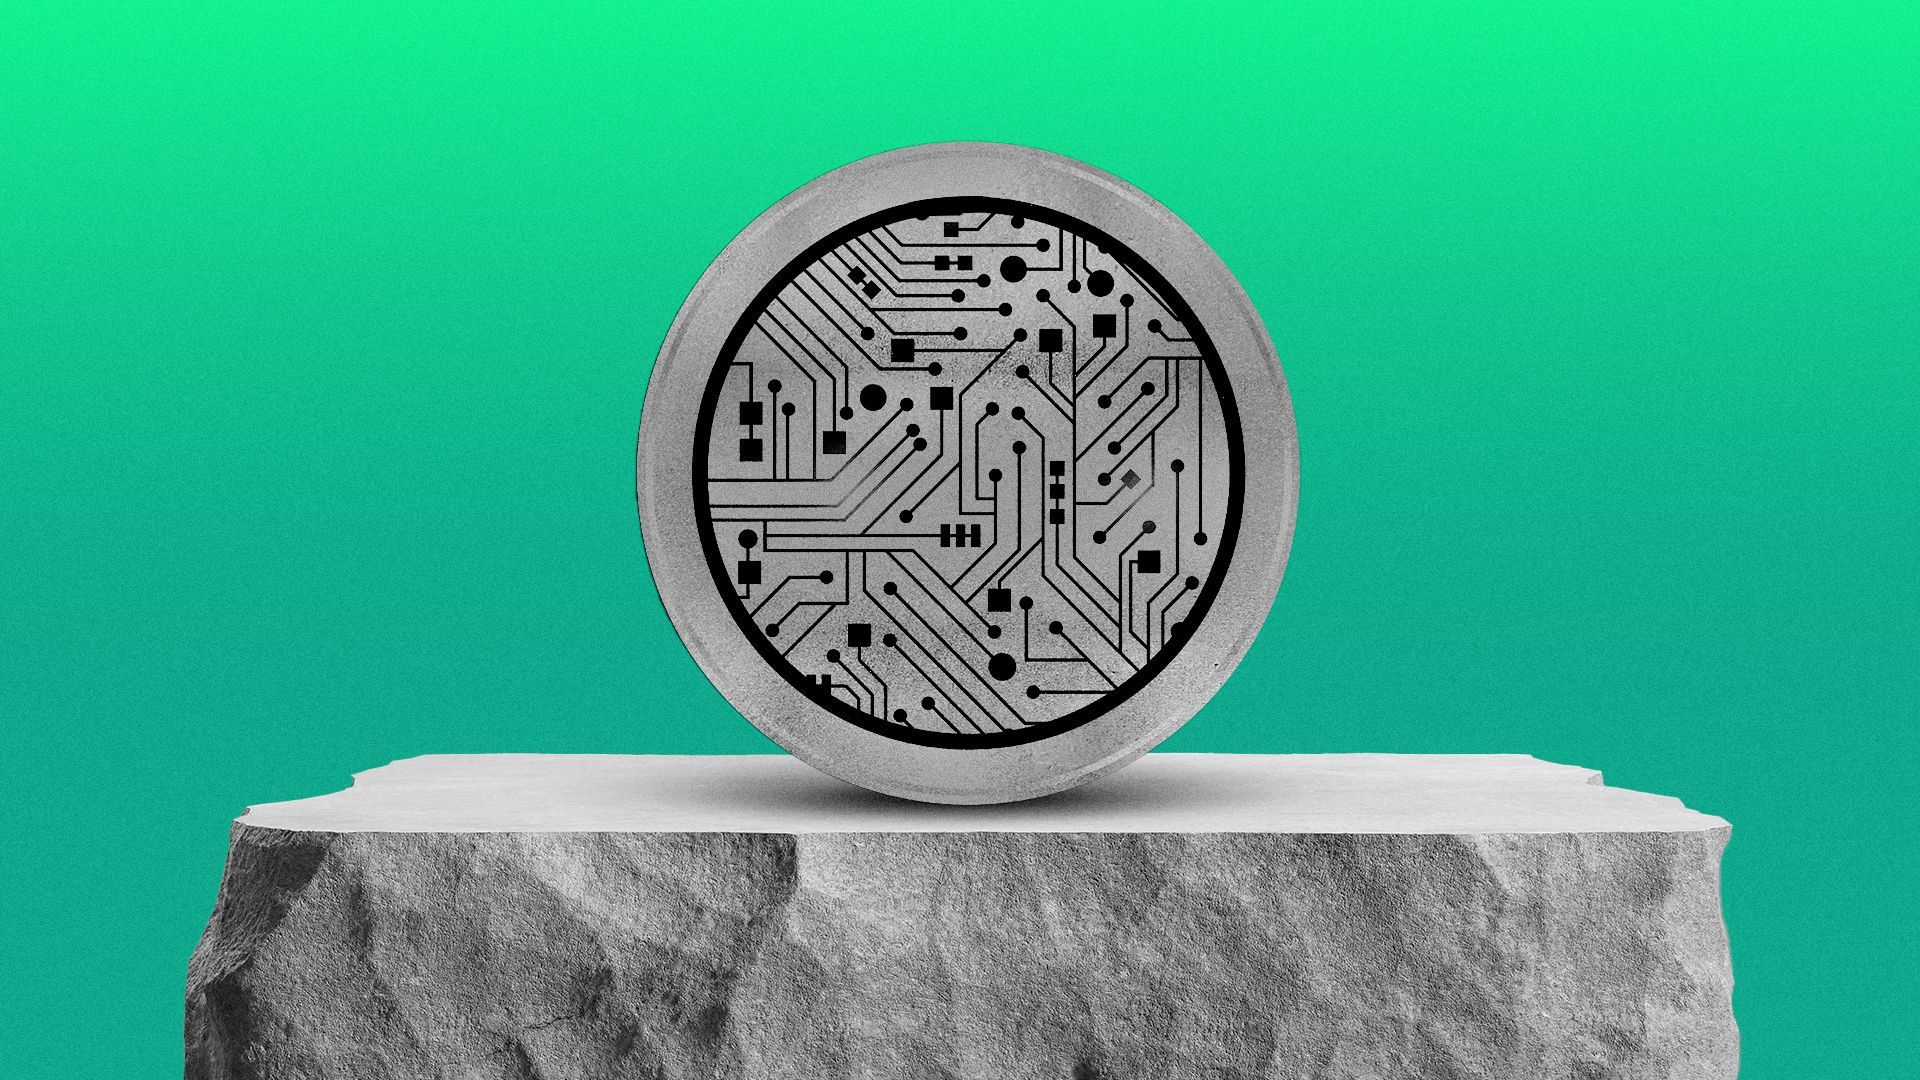 Illustration of a concrete pedestal with a concrete digital coin on top.